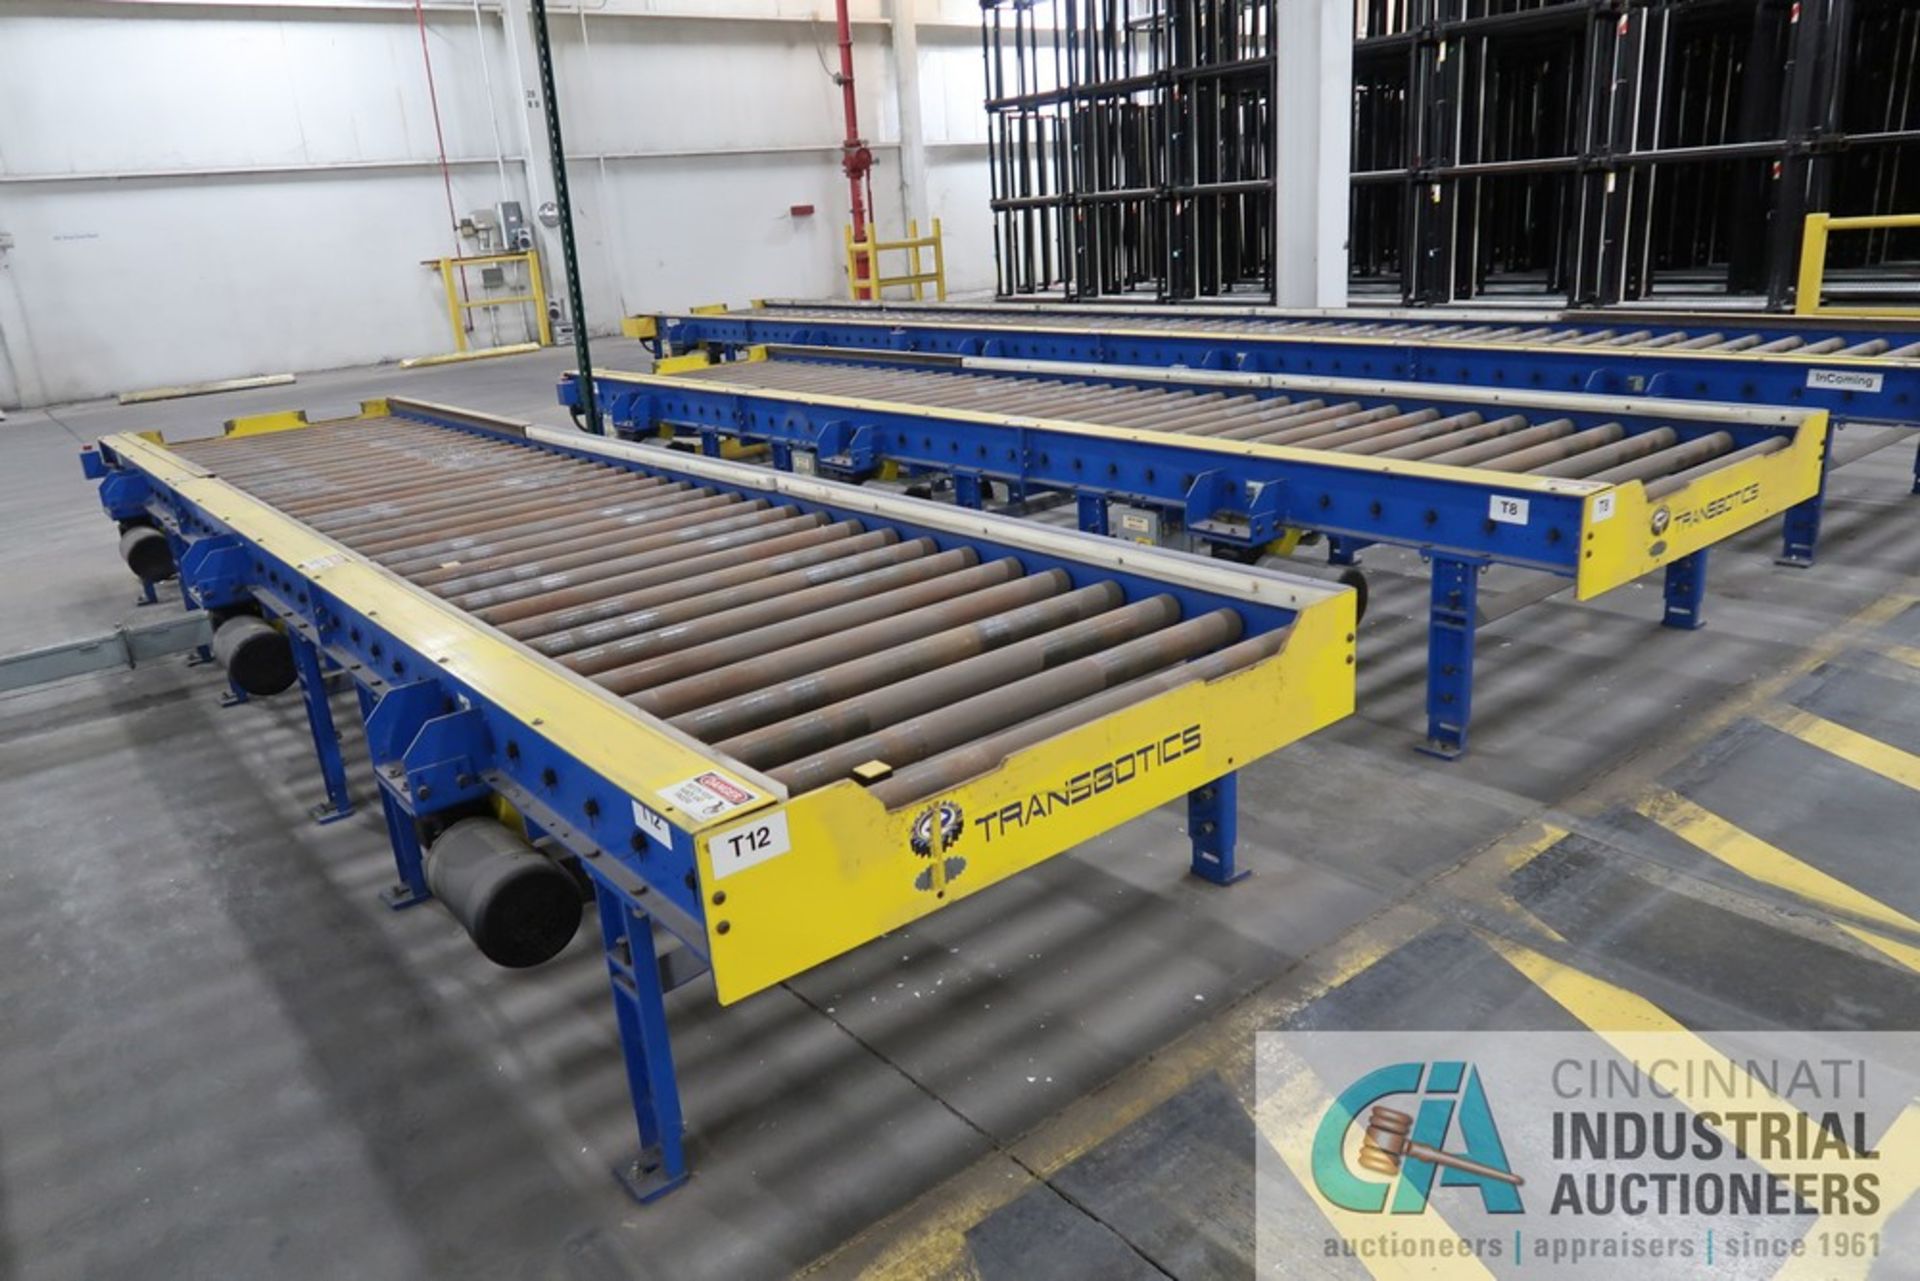 LINES 40" WIDE X 18' LONG (APPROX.) TRANSBOTICS MODEL CDLR-7244 CONVEYOR ACCUMULATOR STATIONS WITH - Image 3 of 18